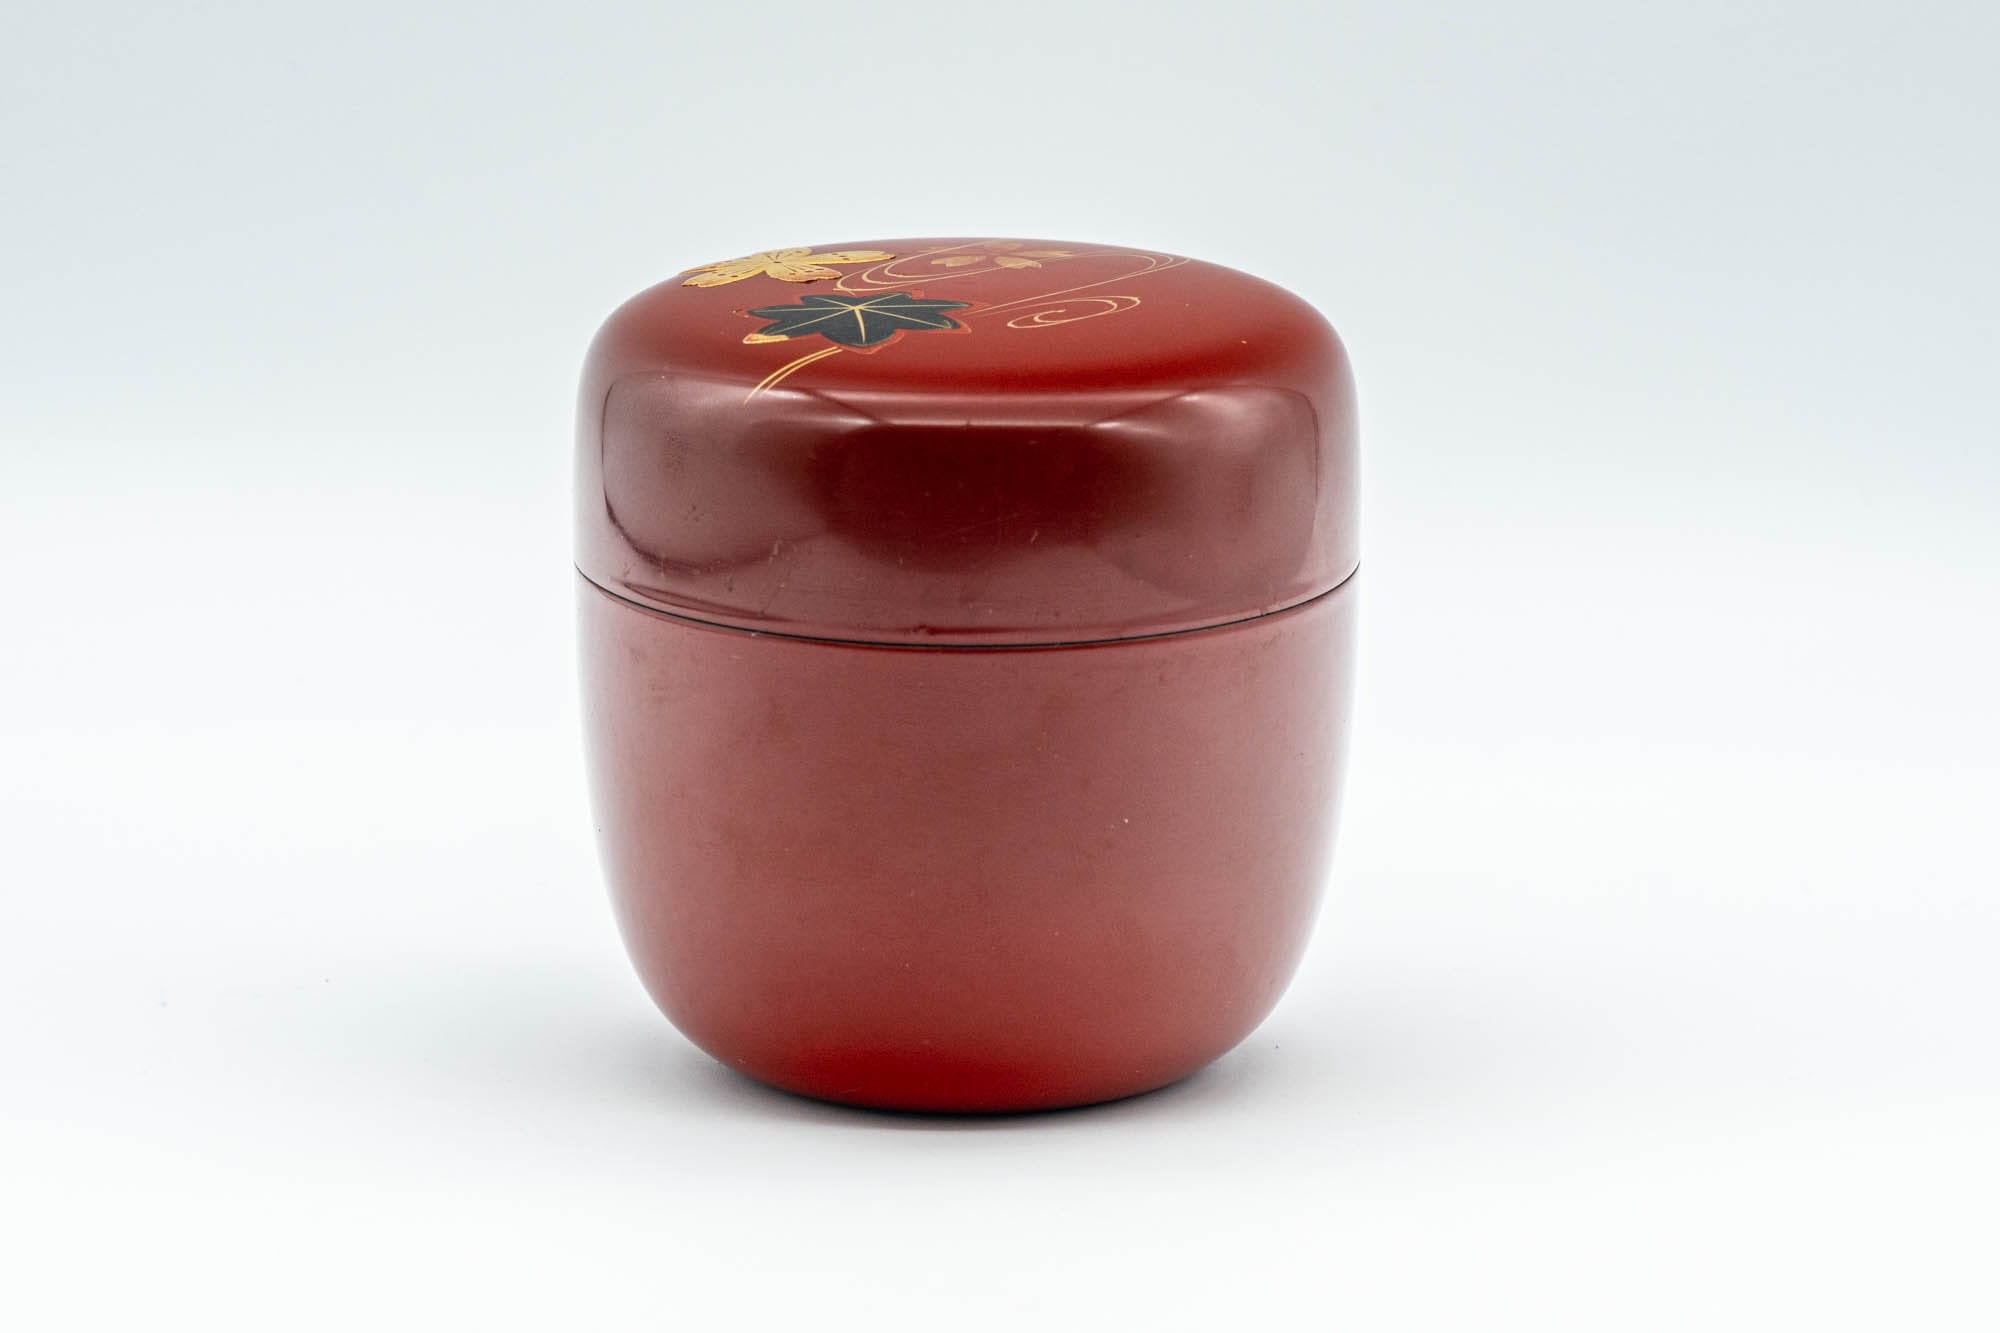 Japanese Natsume - Floral Red Lacquer Matcha Tea Caddy - 100ml